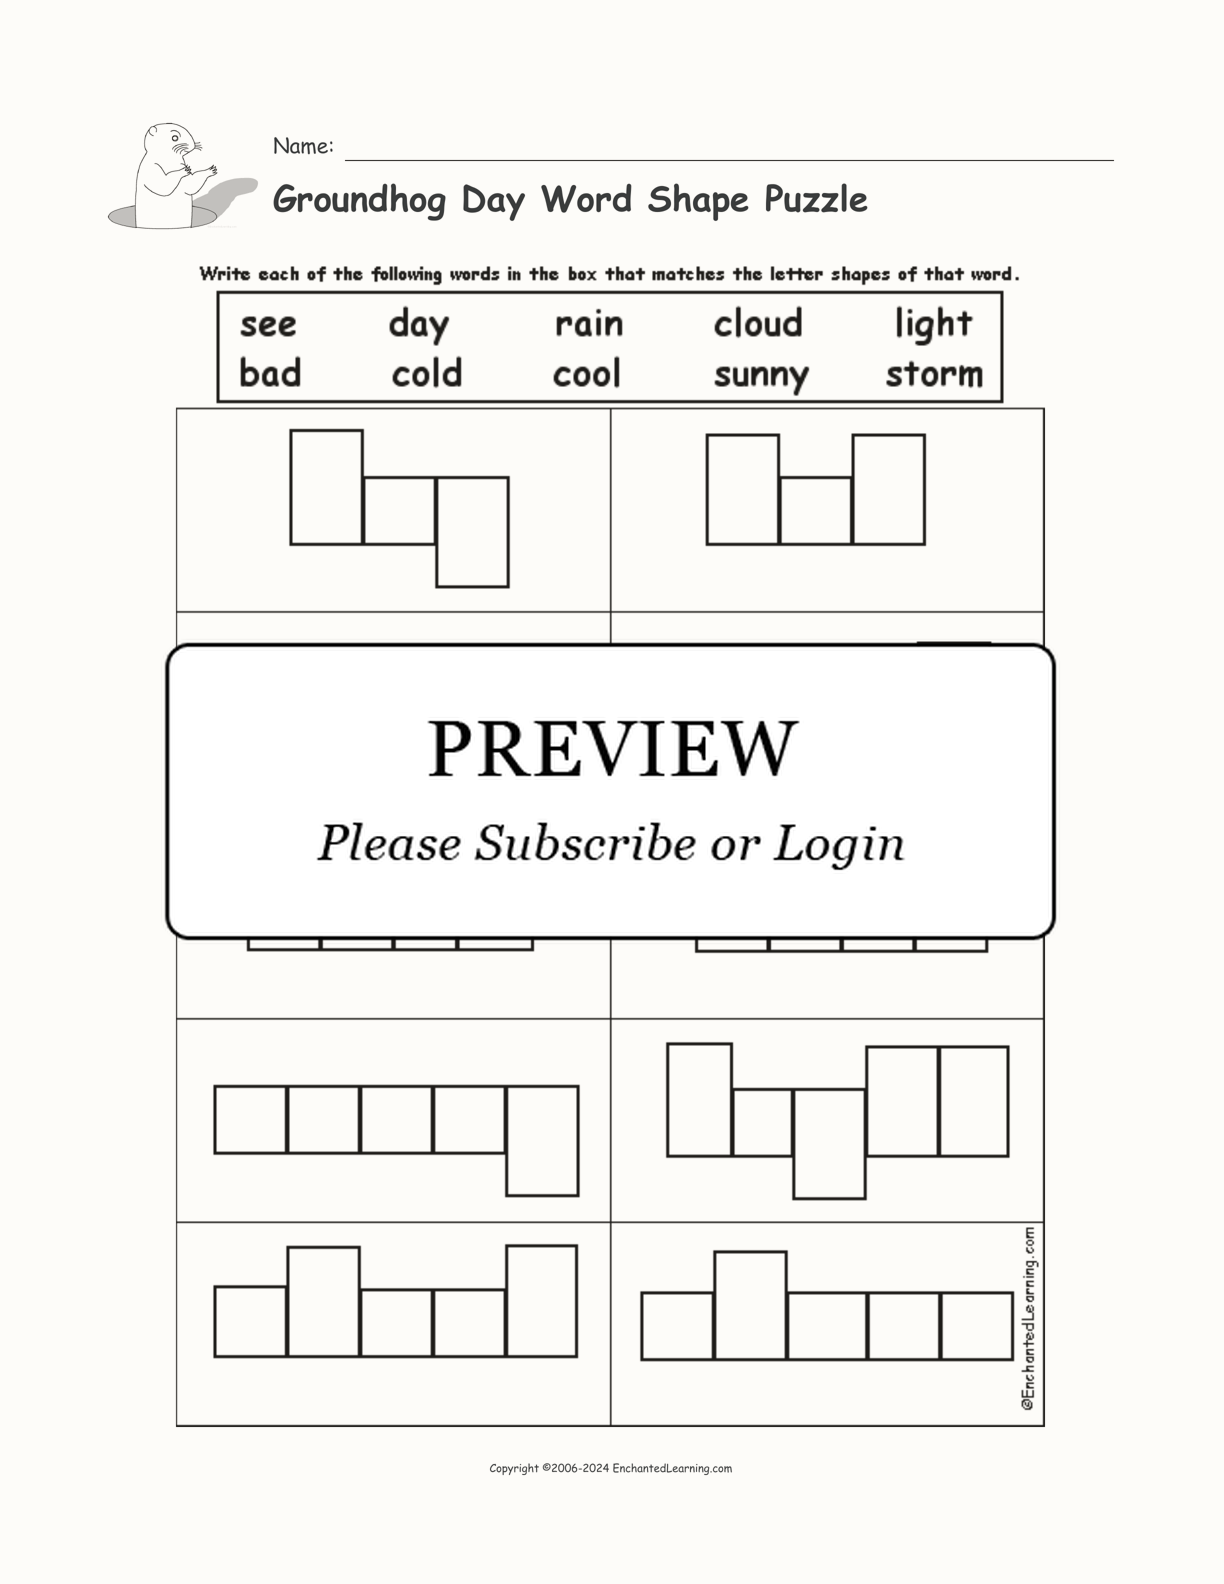 Groundhog Day Word Shape Puzzle interactive worksheet page 1